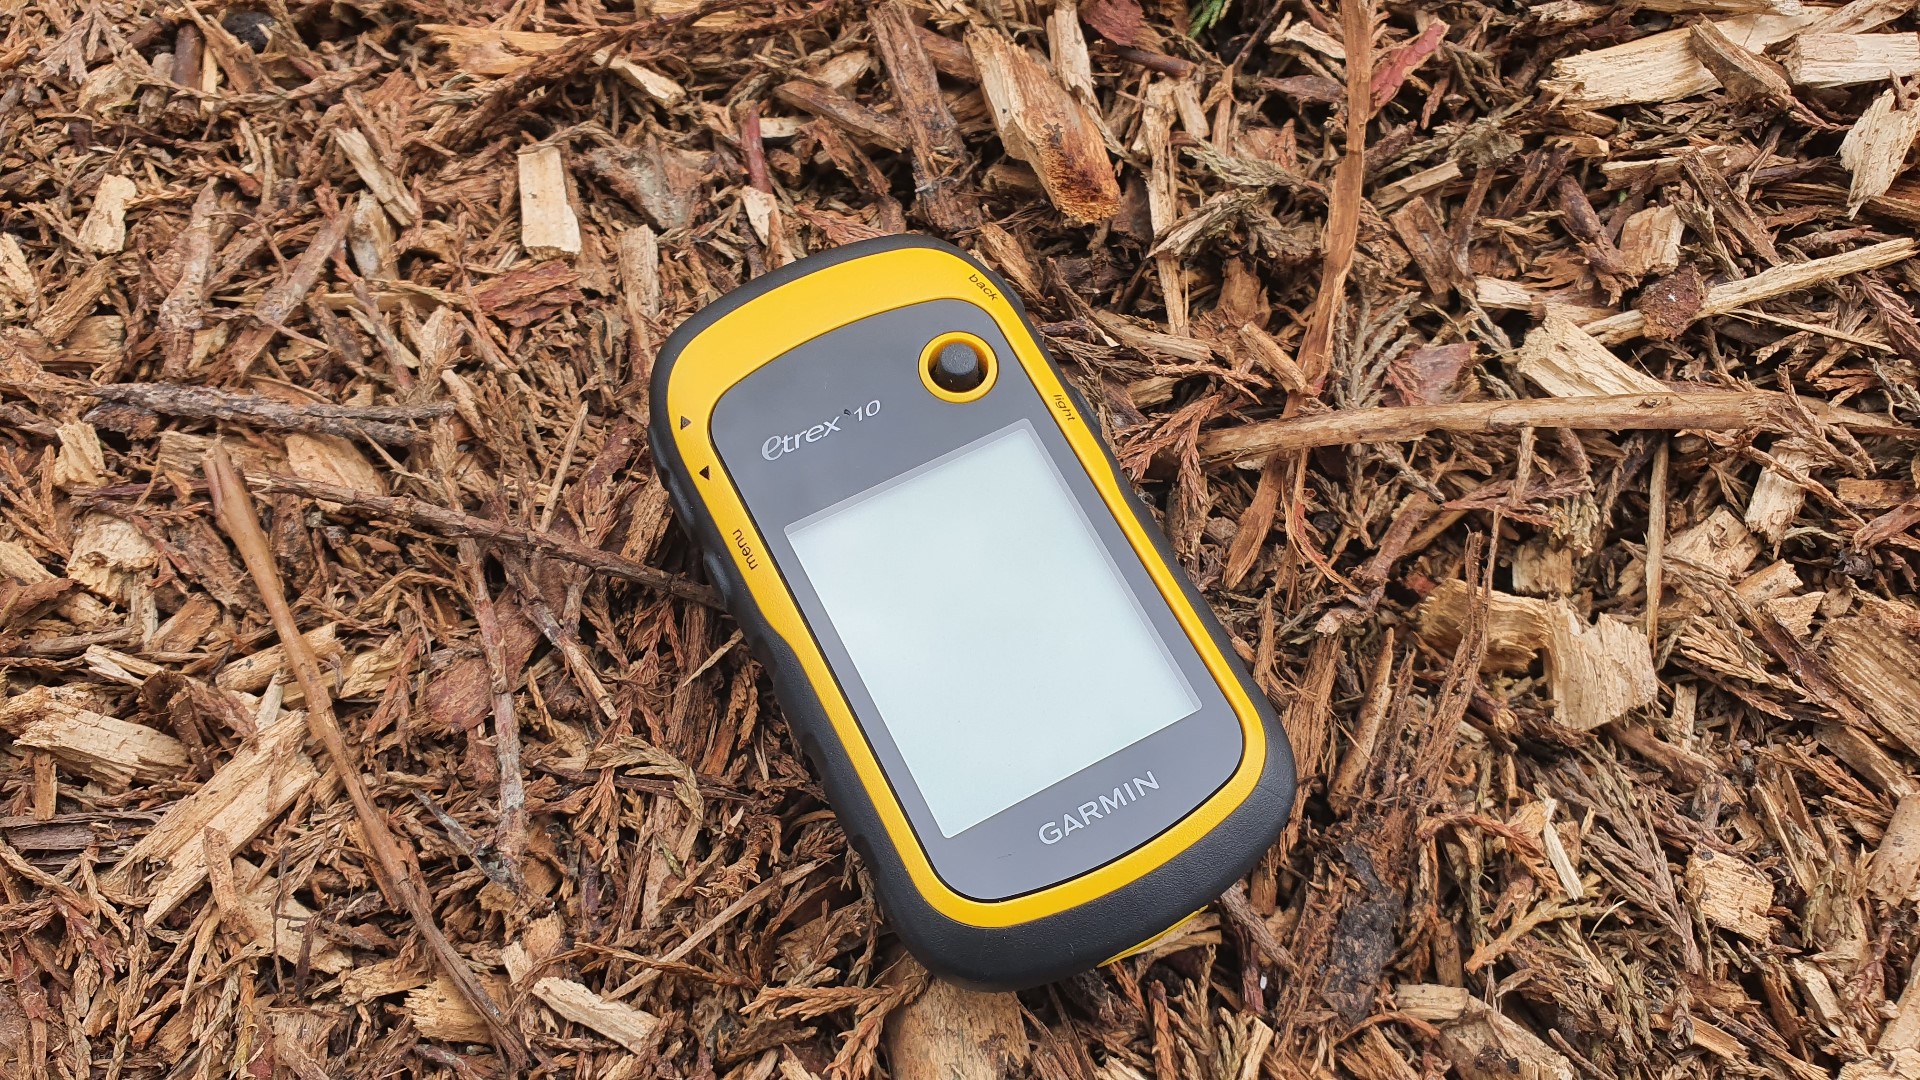 Garmin eTrex 32x GPS - Review and overview of this outdoor GPS unit 